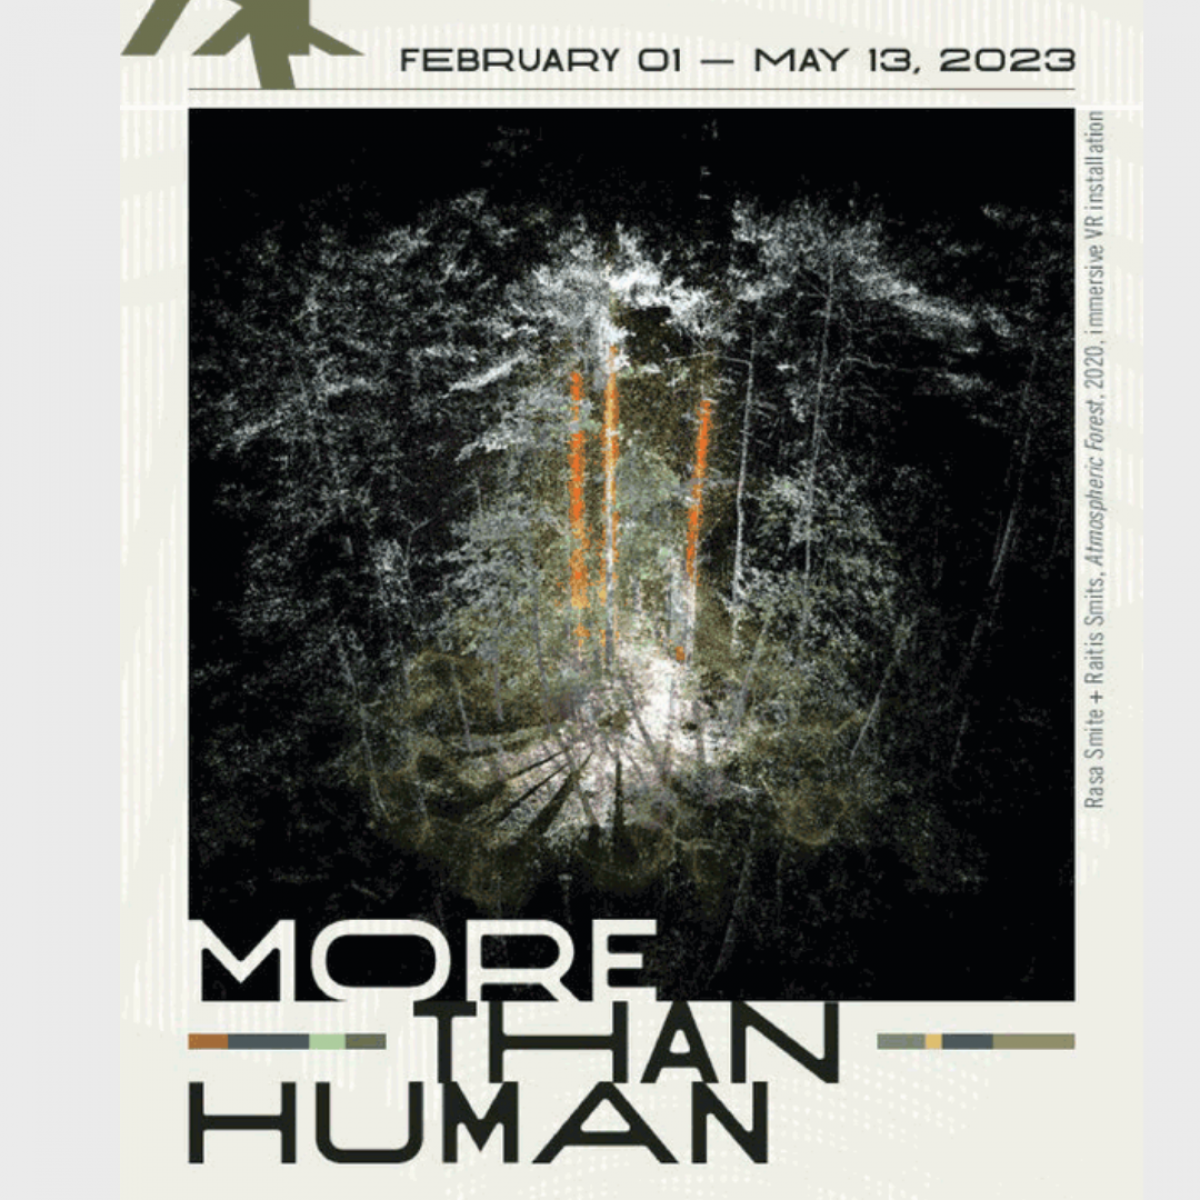 A promotional poster image depicting a digital image of a 3D forest at night with a bright light in the centre of a group of trees. Around the image is text communicating that the name of the promoted exhibition is "more-than-human" and that it will be running from February 1 to May 13, 2023.